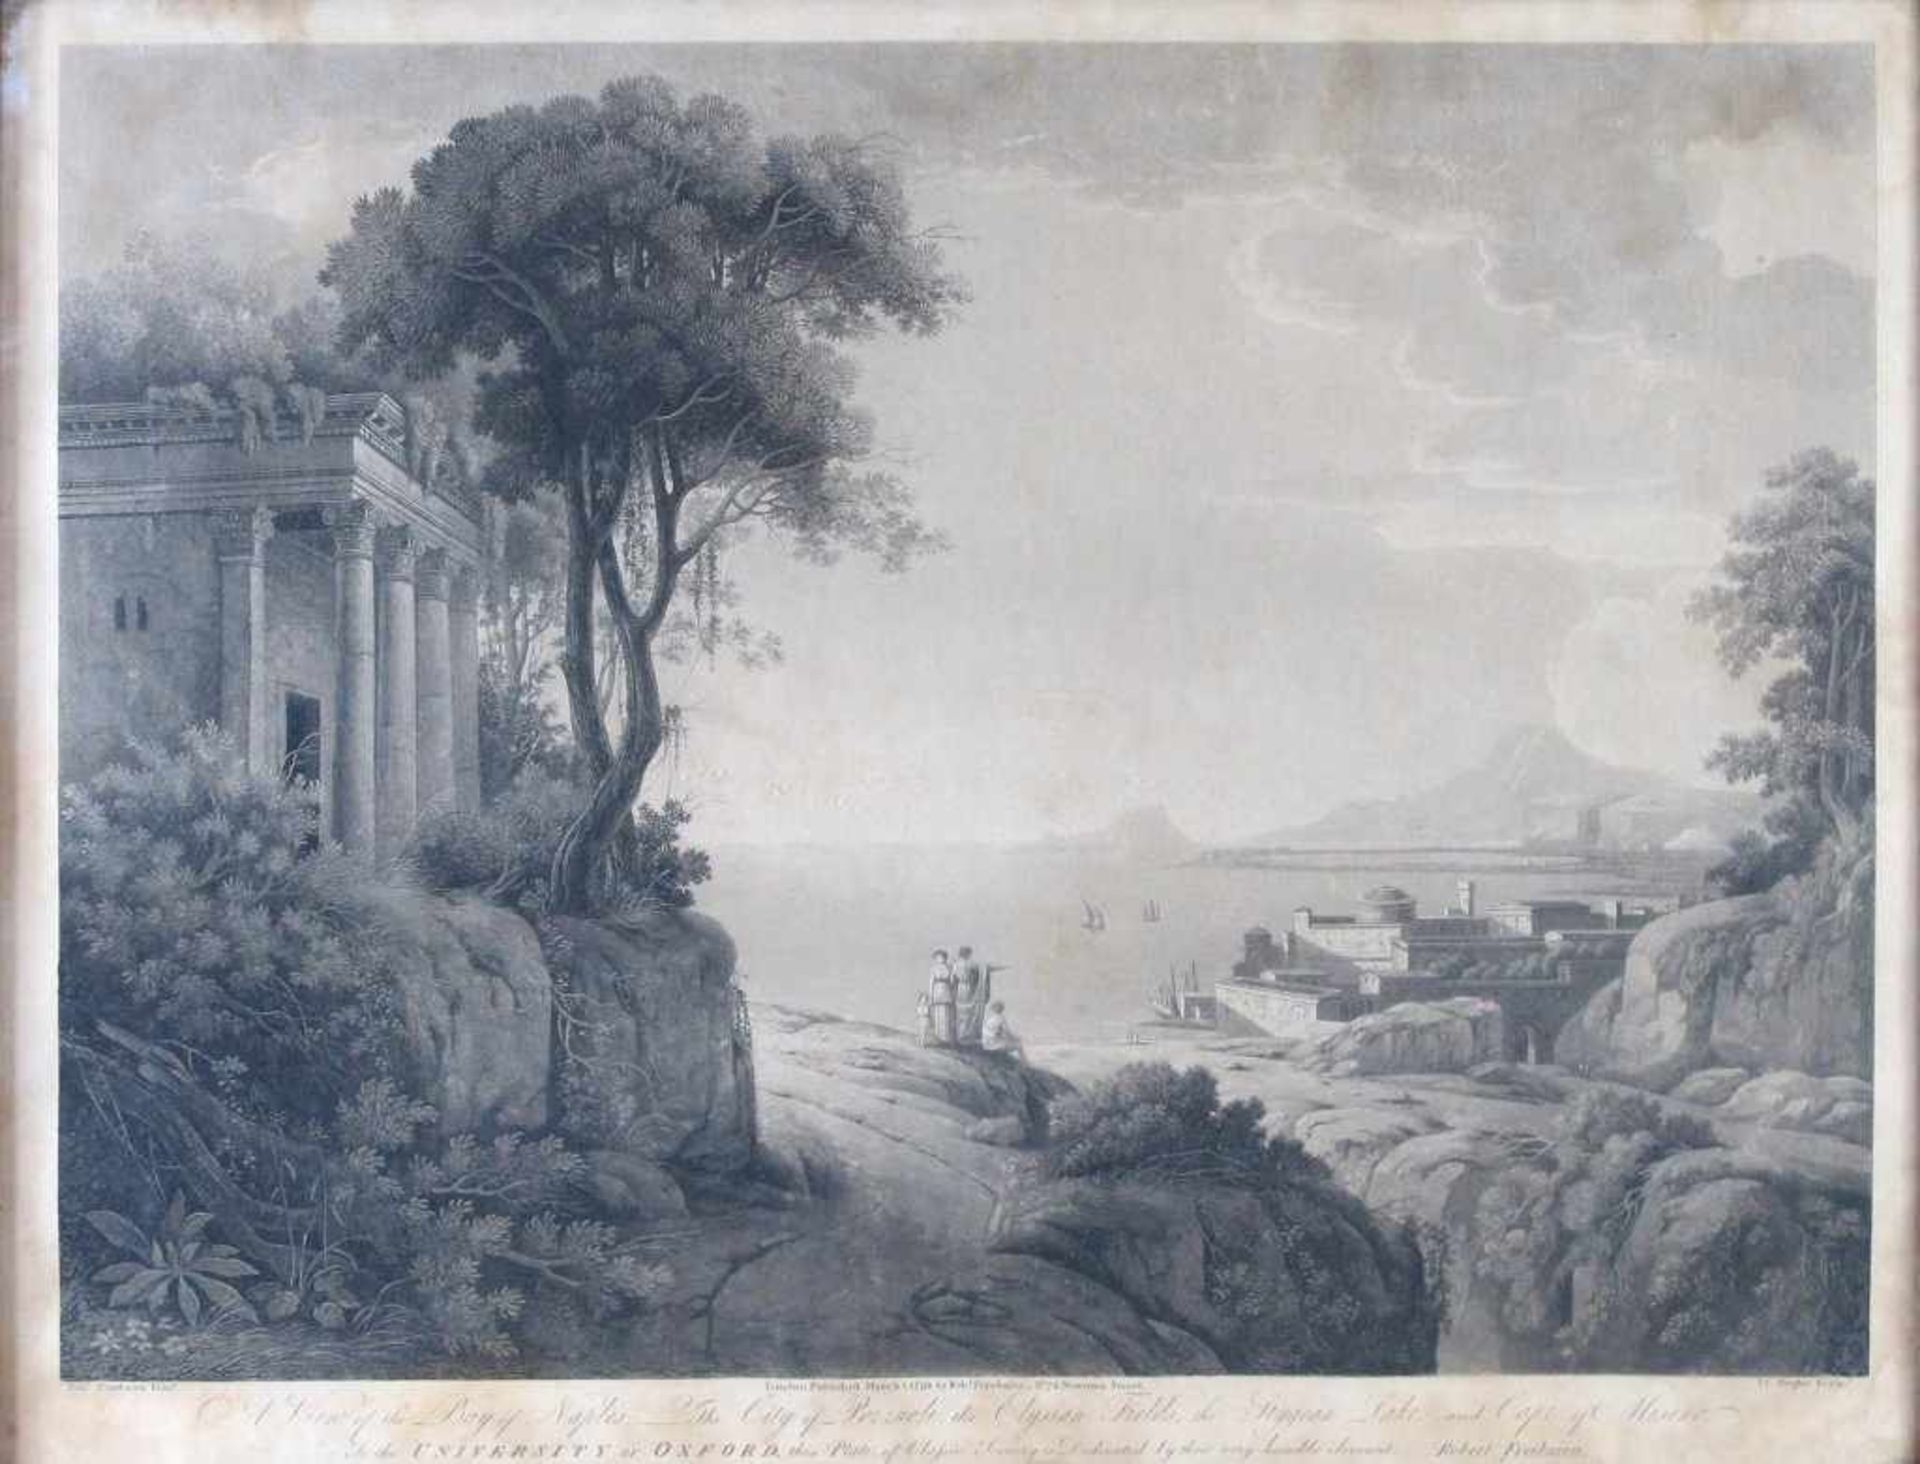 Neapel. "A View of the Bay of Naples. The City of Pozzuoli, the Elysian Fields, the Stygcan Lake and